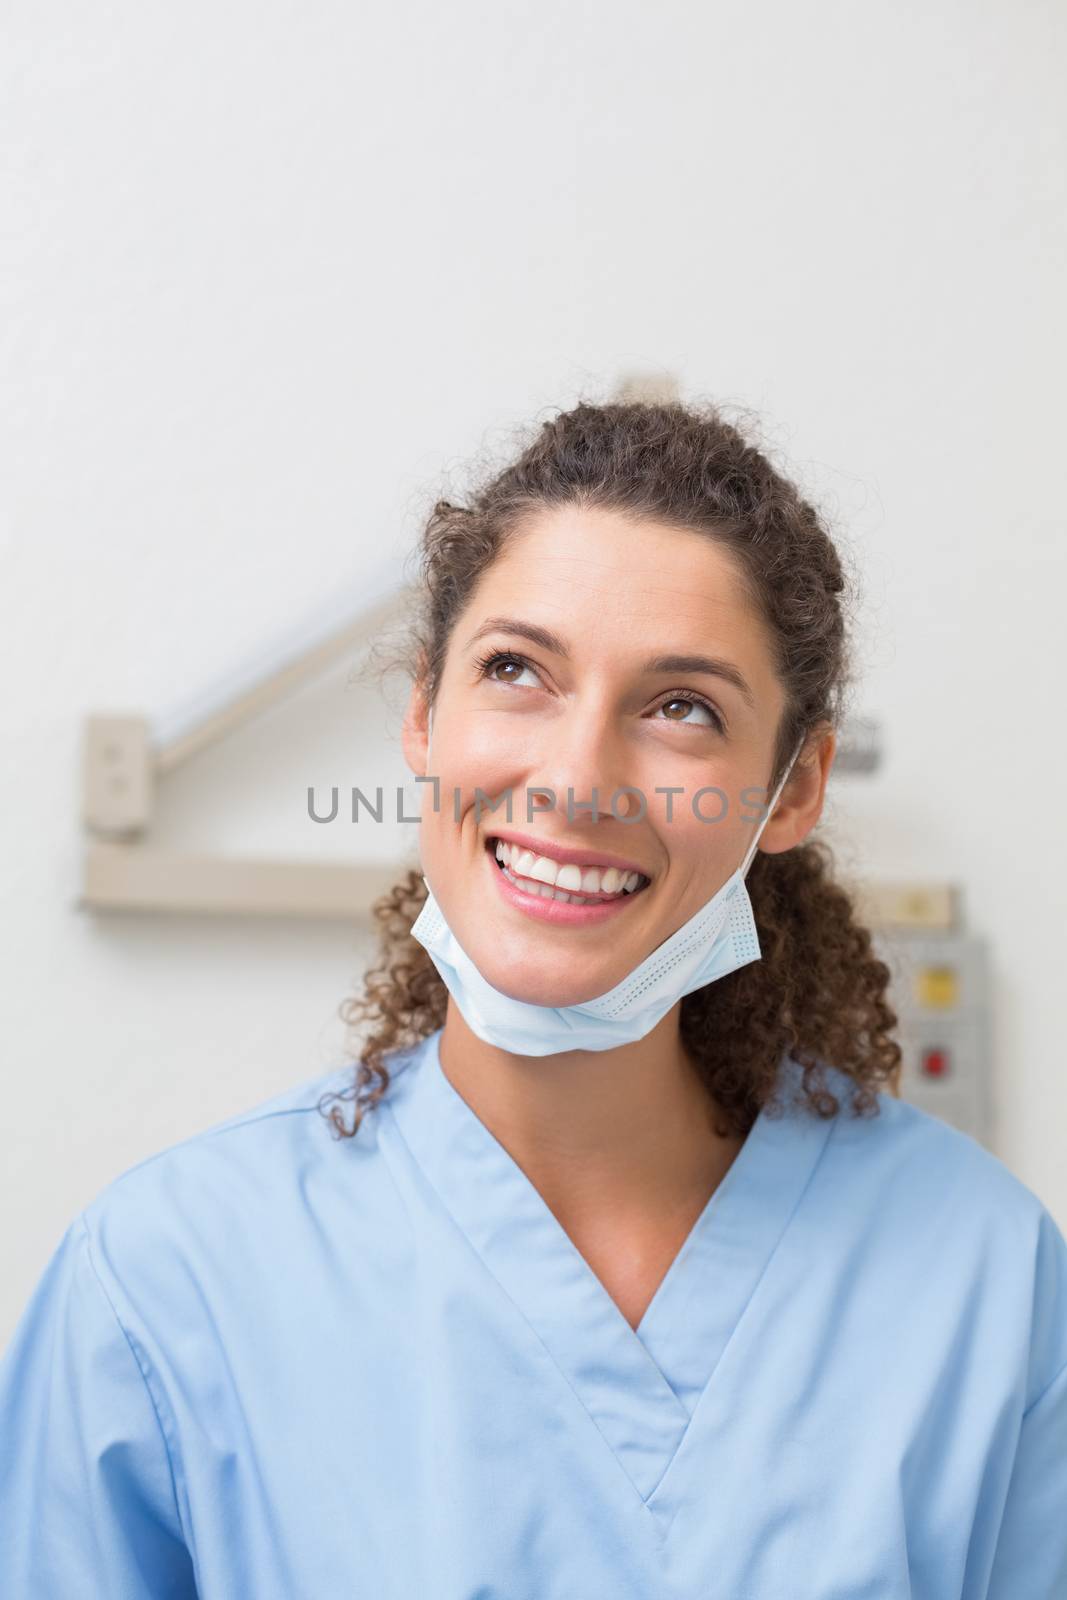 Dentist in blue scrubs smiling and thinking by Wavebreakmedia